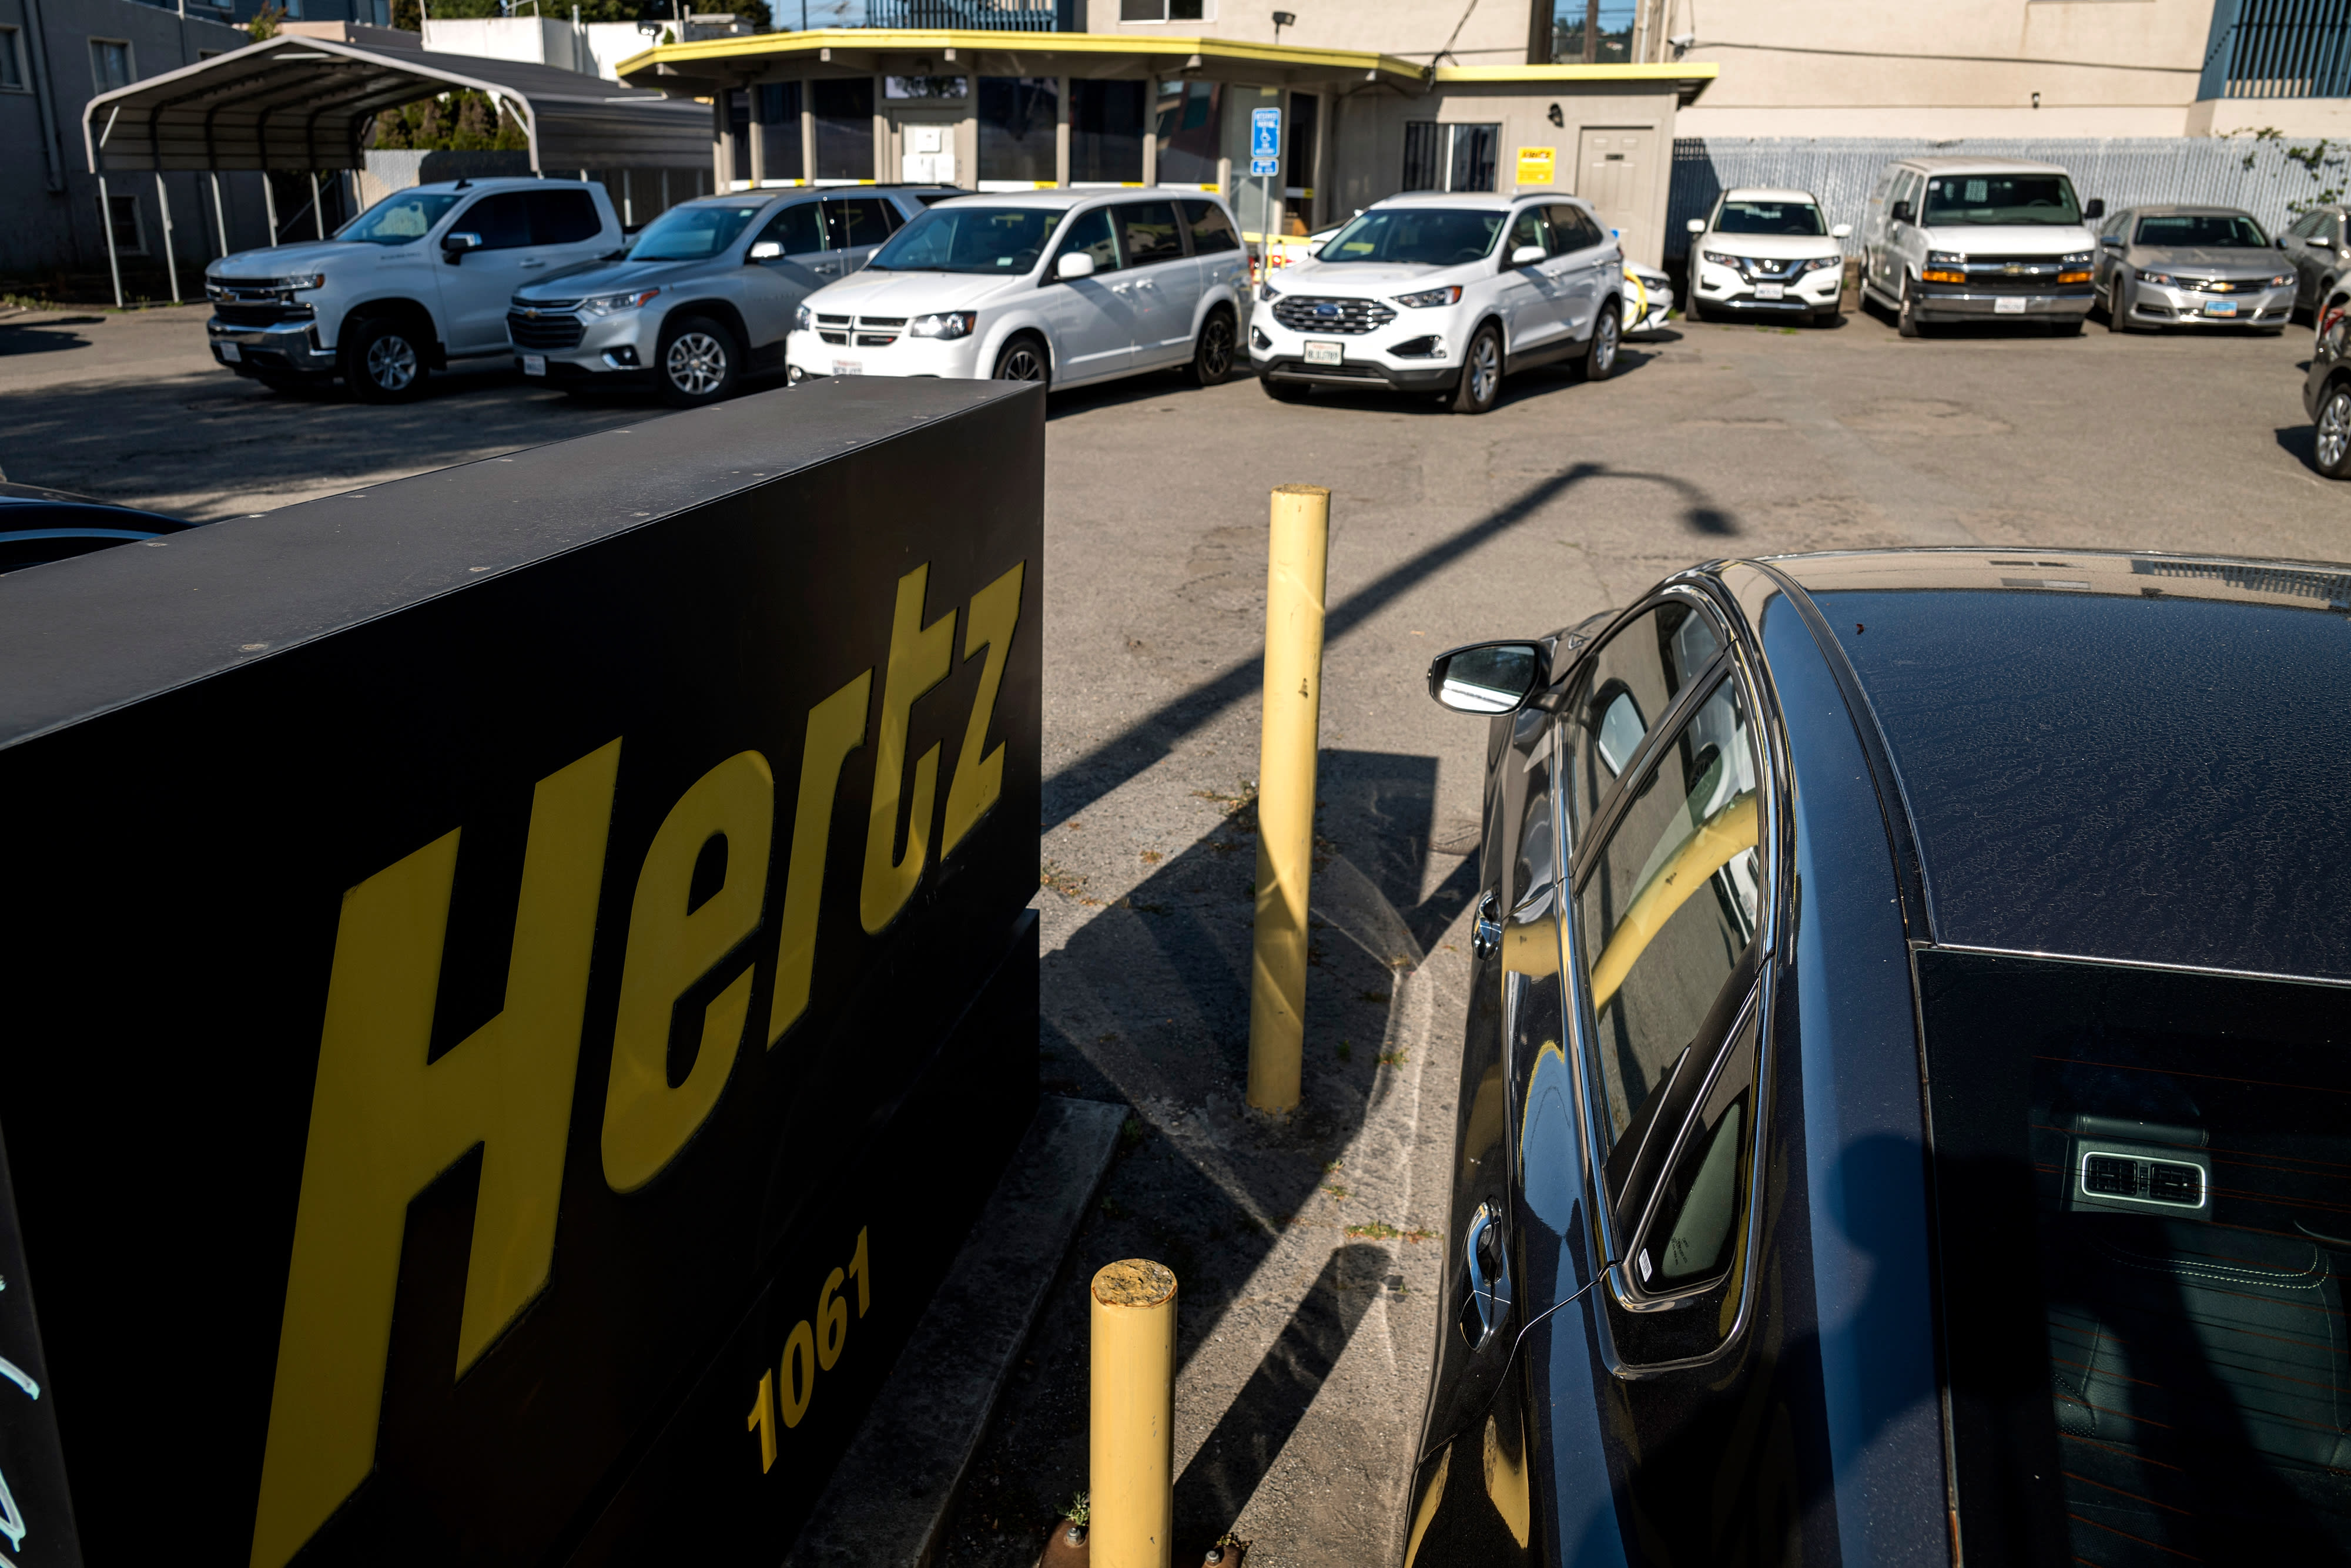 Hertz's stock may look cheap, but Cramer cautions against buying it